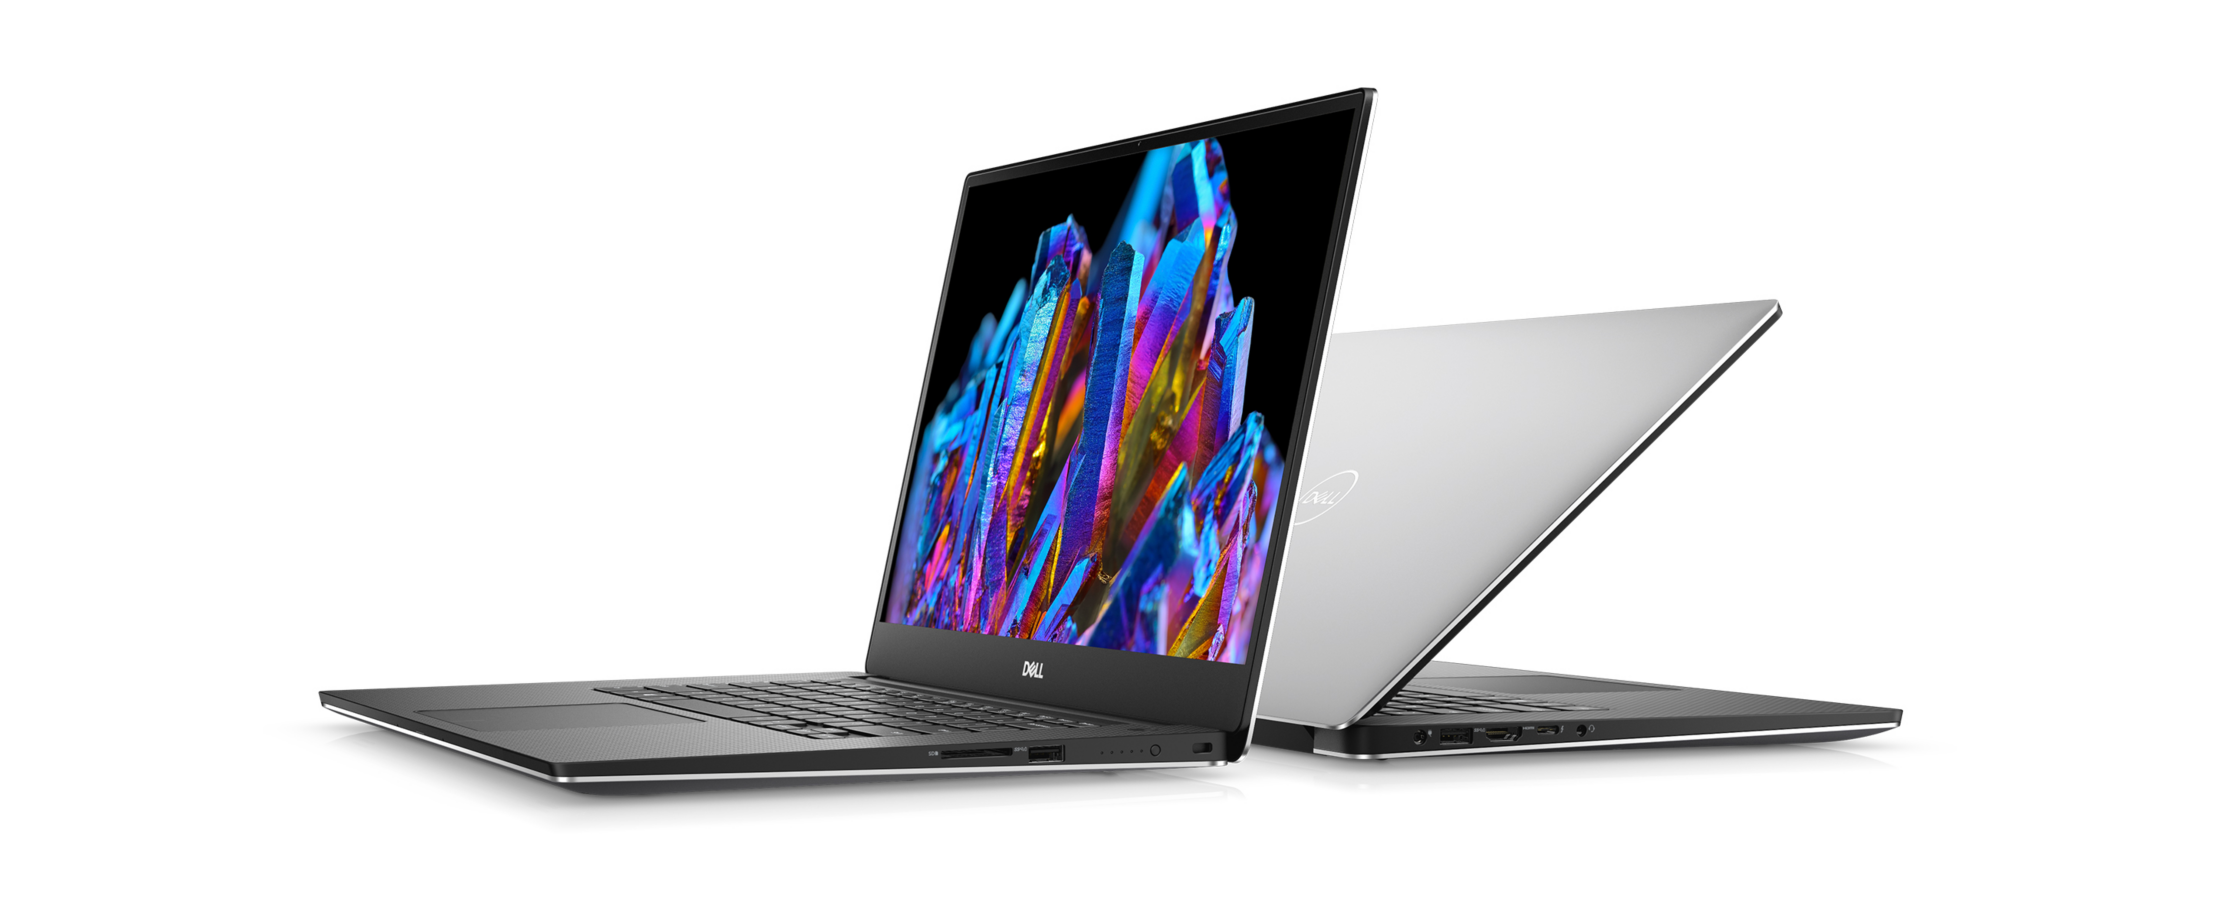 New Dell XPS 15 (7590) with 9th Gen Intel processors and GTX 1650 are available in Malaysia